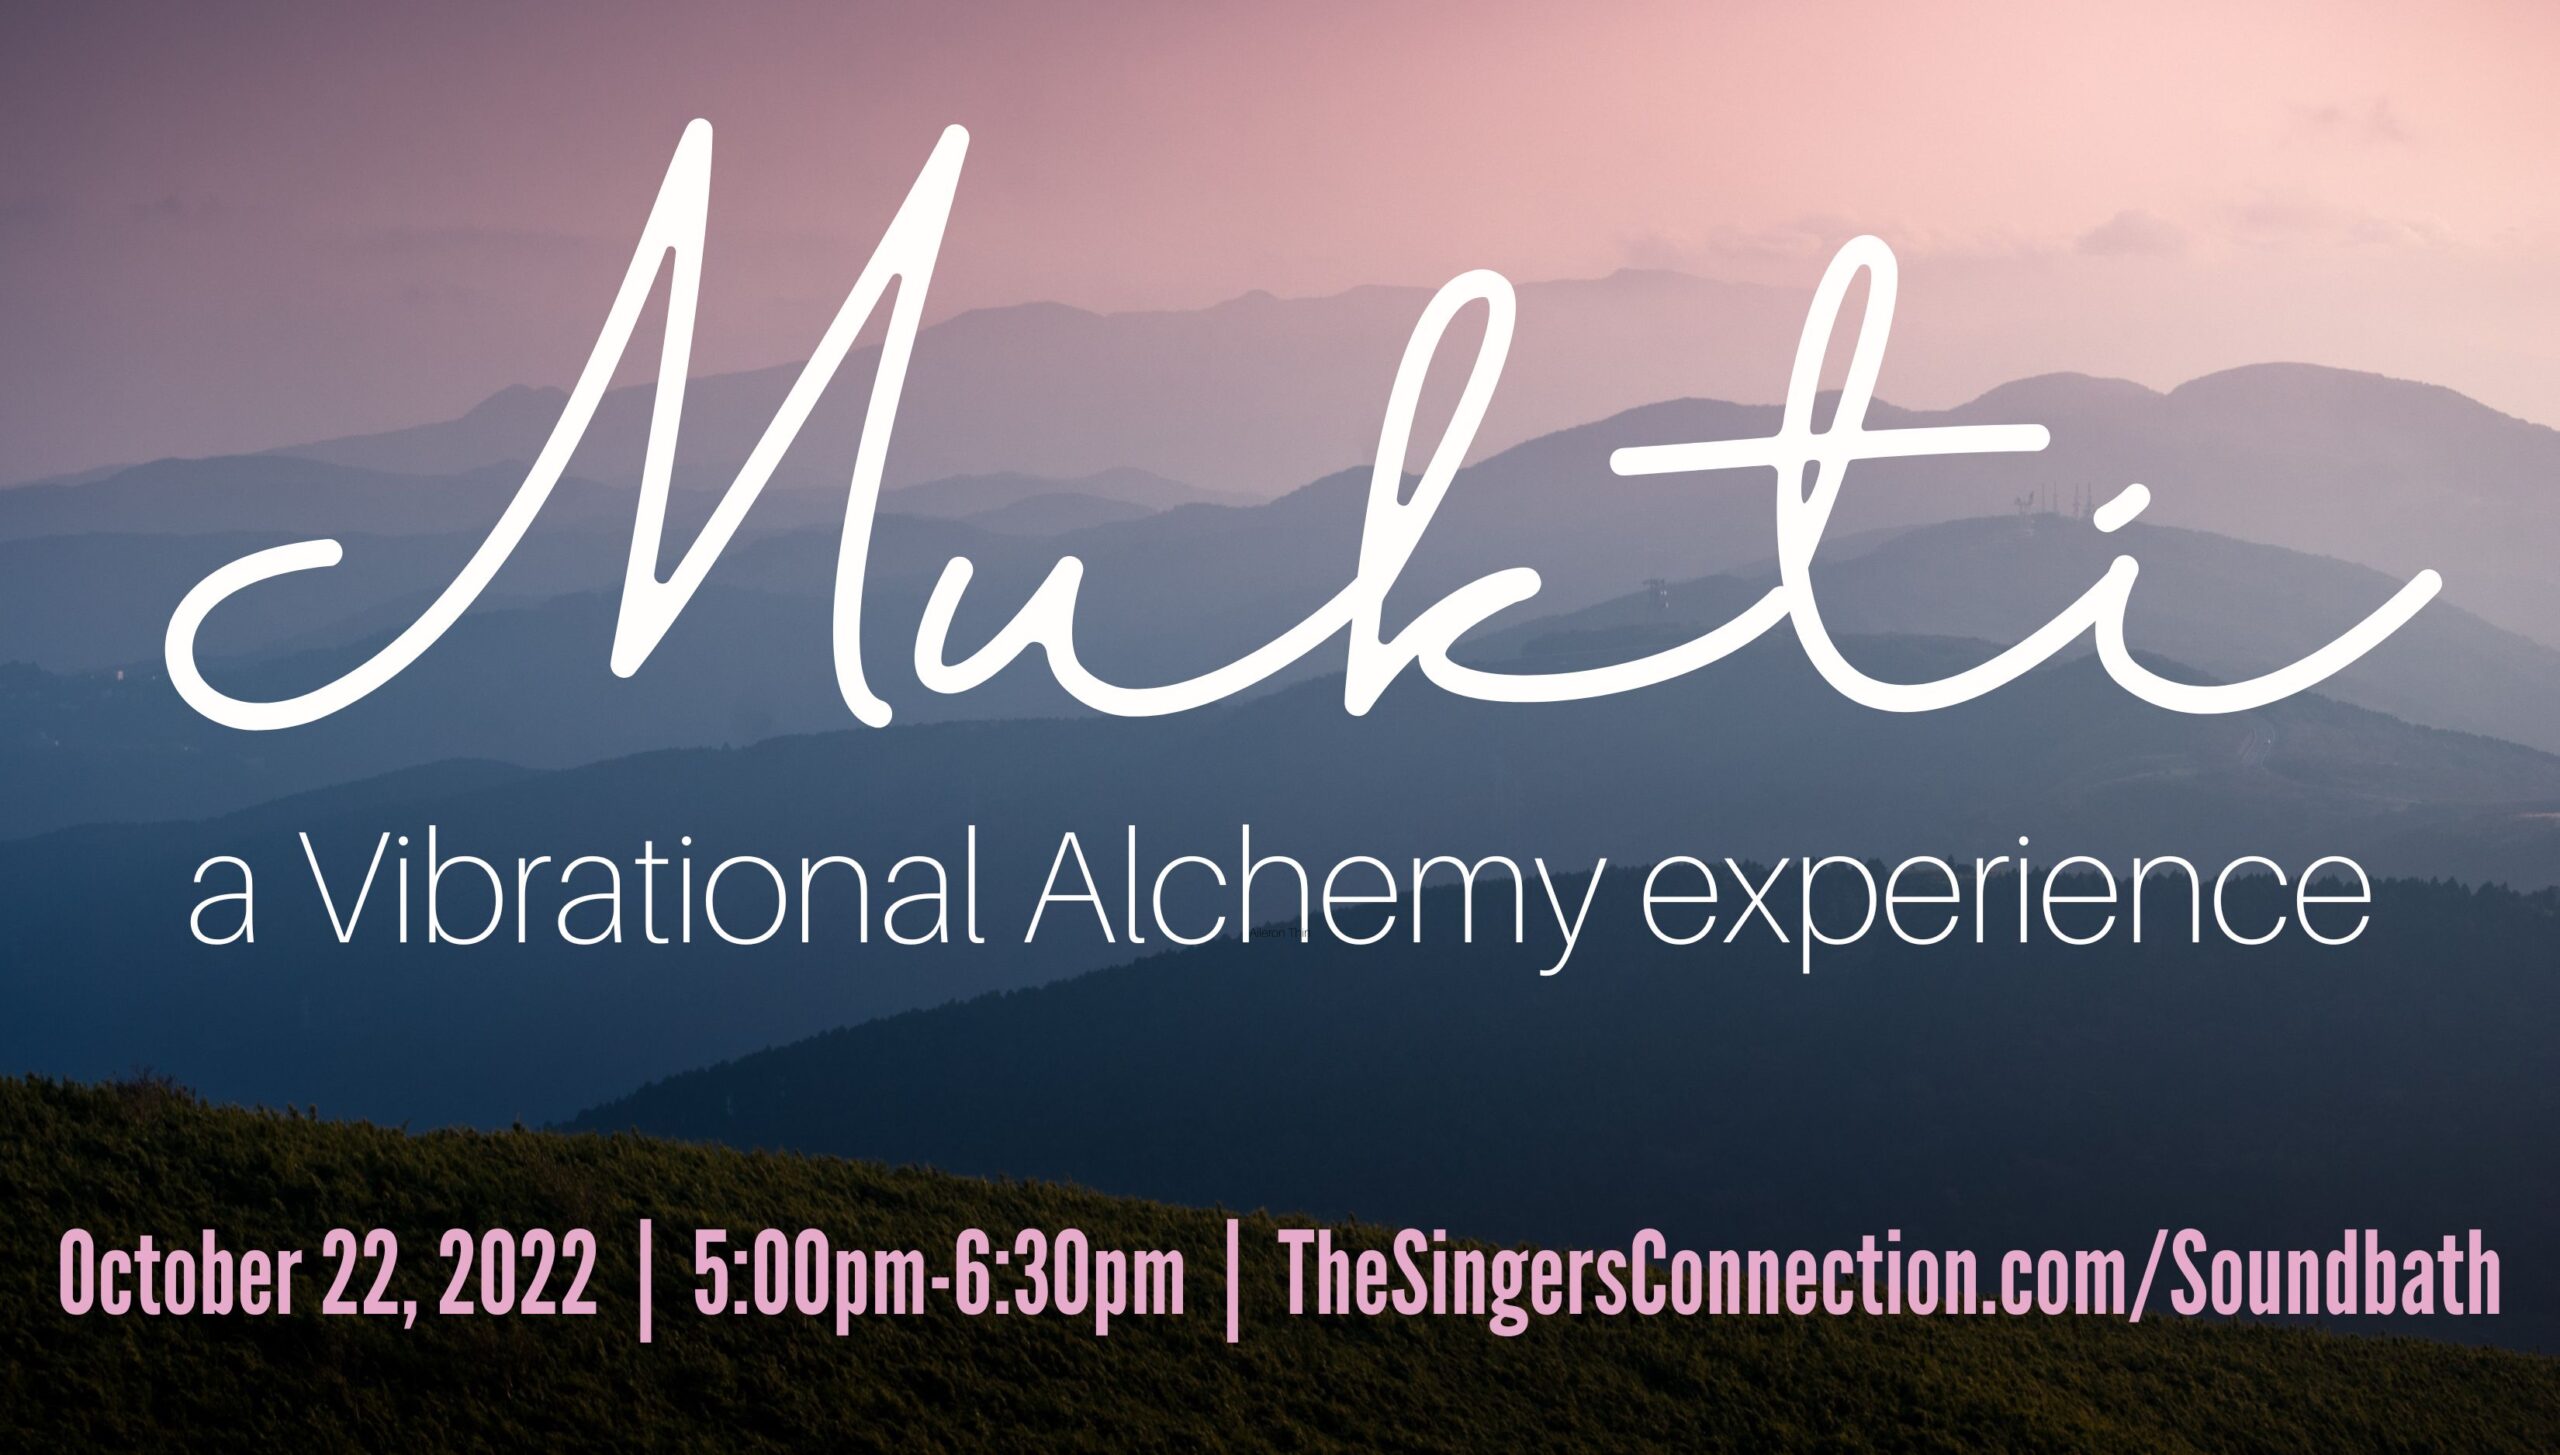 Come enjoy this Vibrational Alchemy experience!